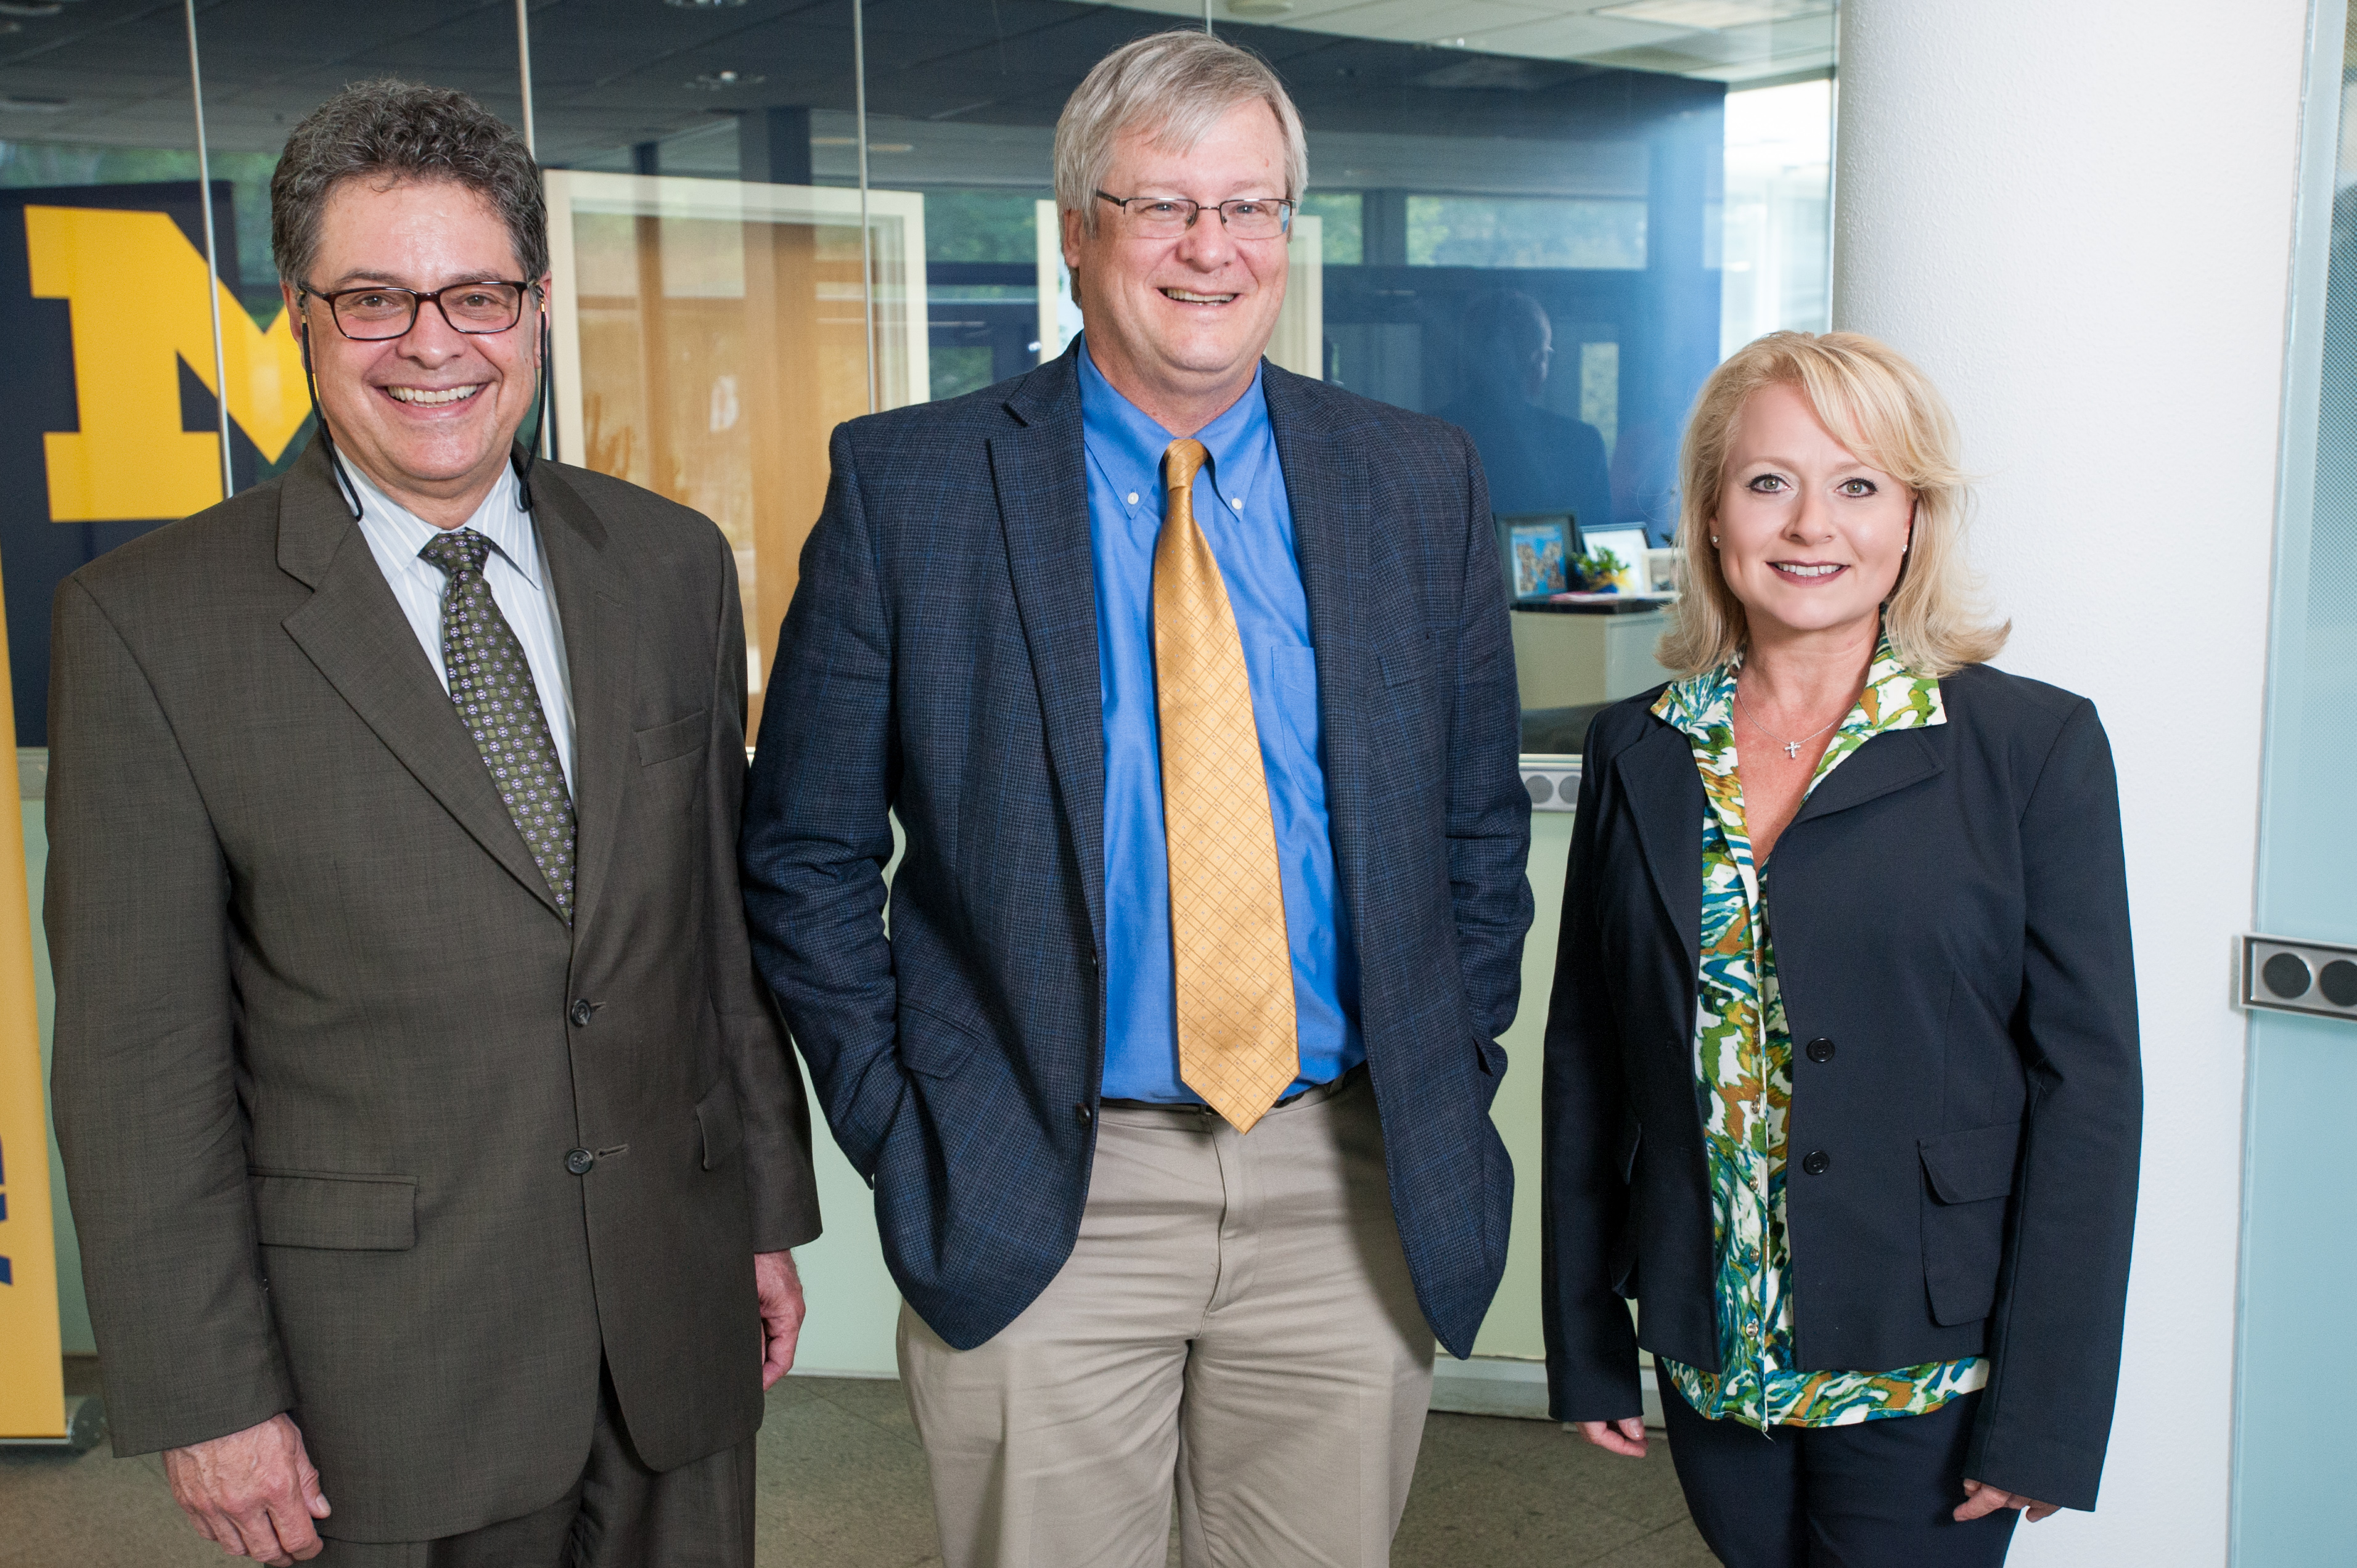 Drs. Charles Parkos and Jeffrey Myers welcome Dr. Julia Dahl to the University of Michigan in 2016